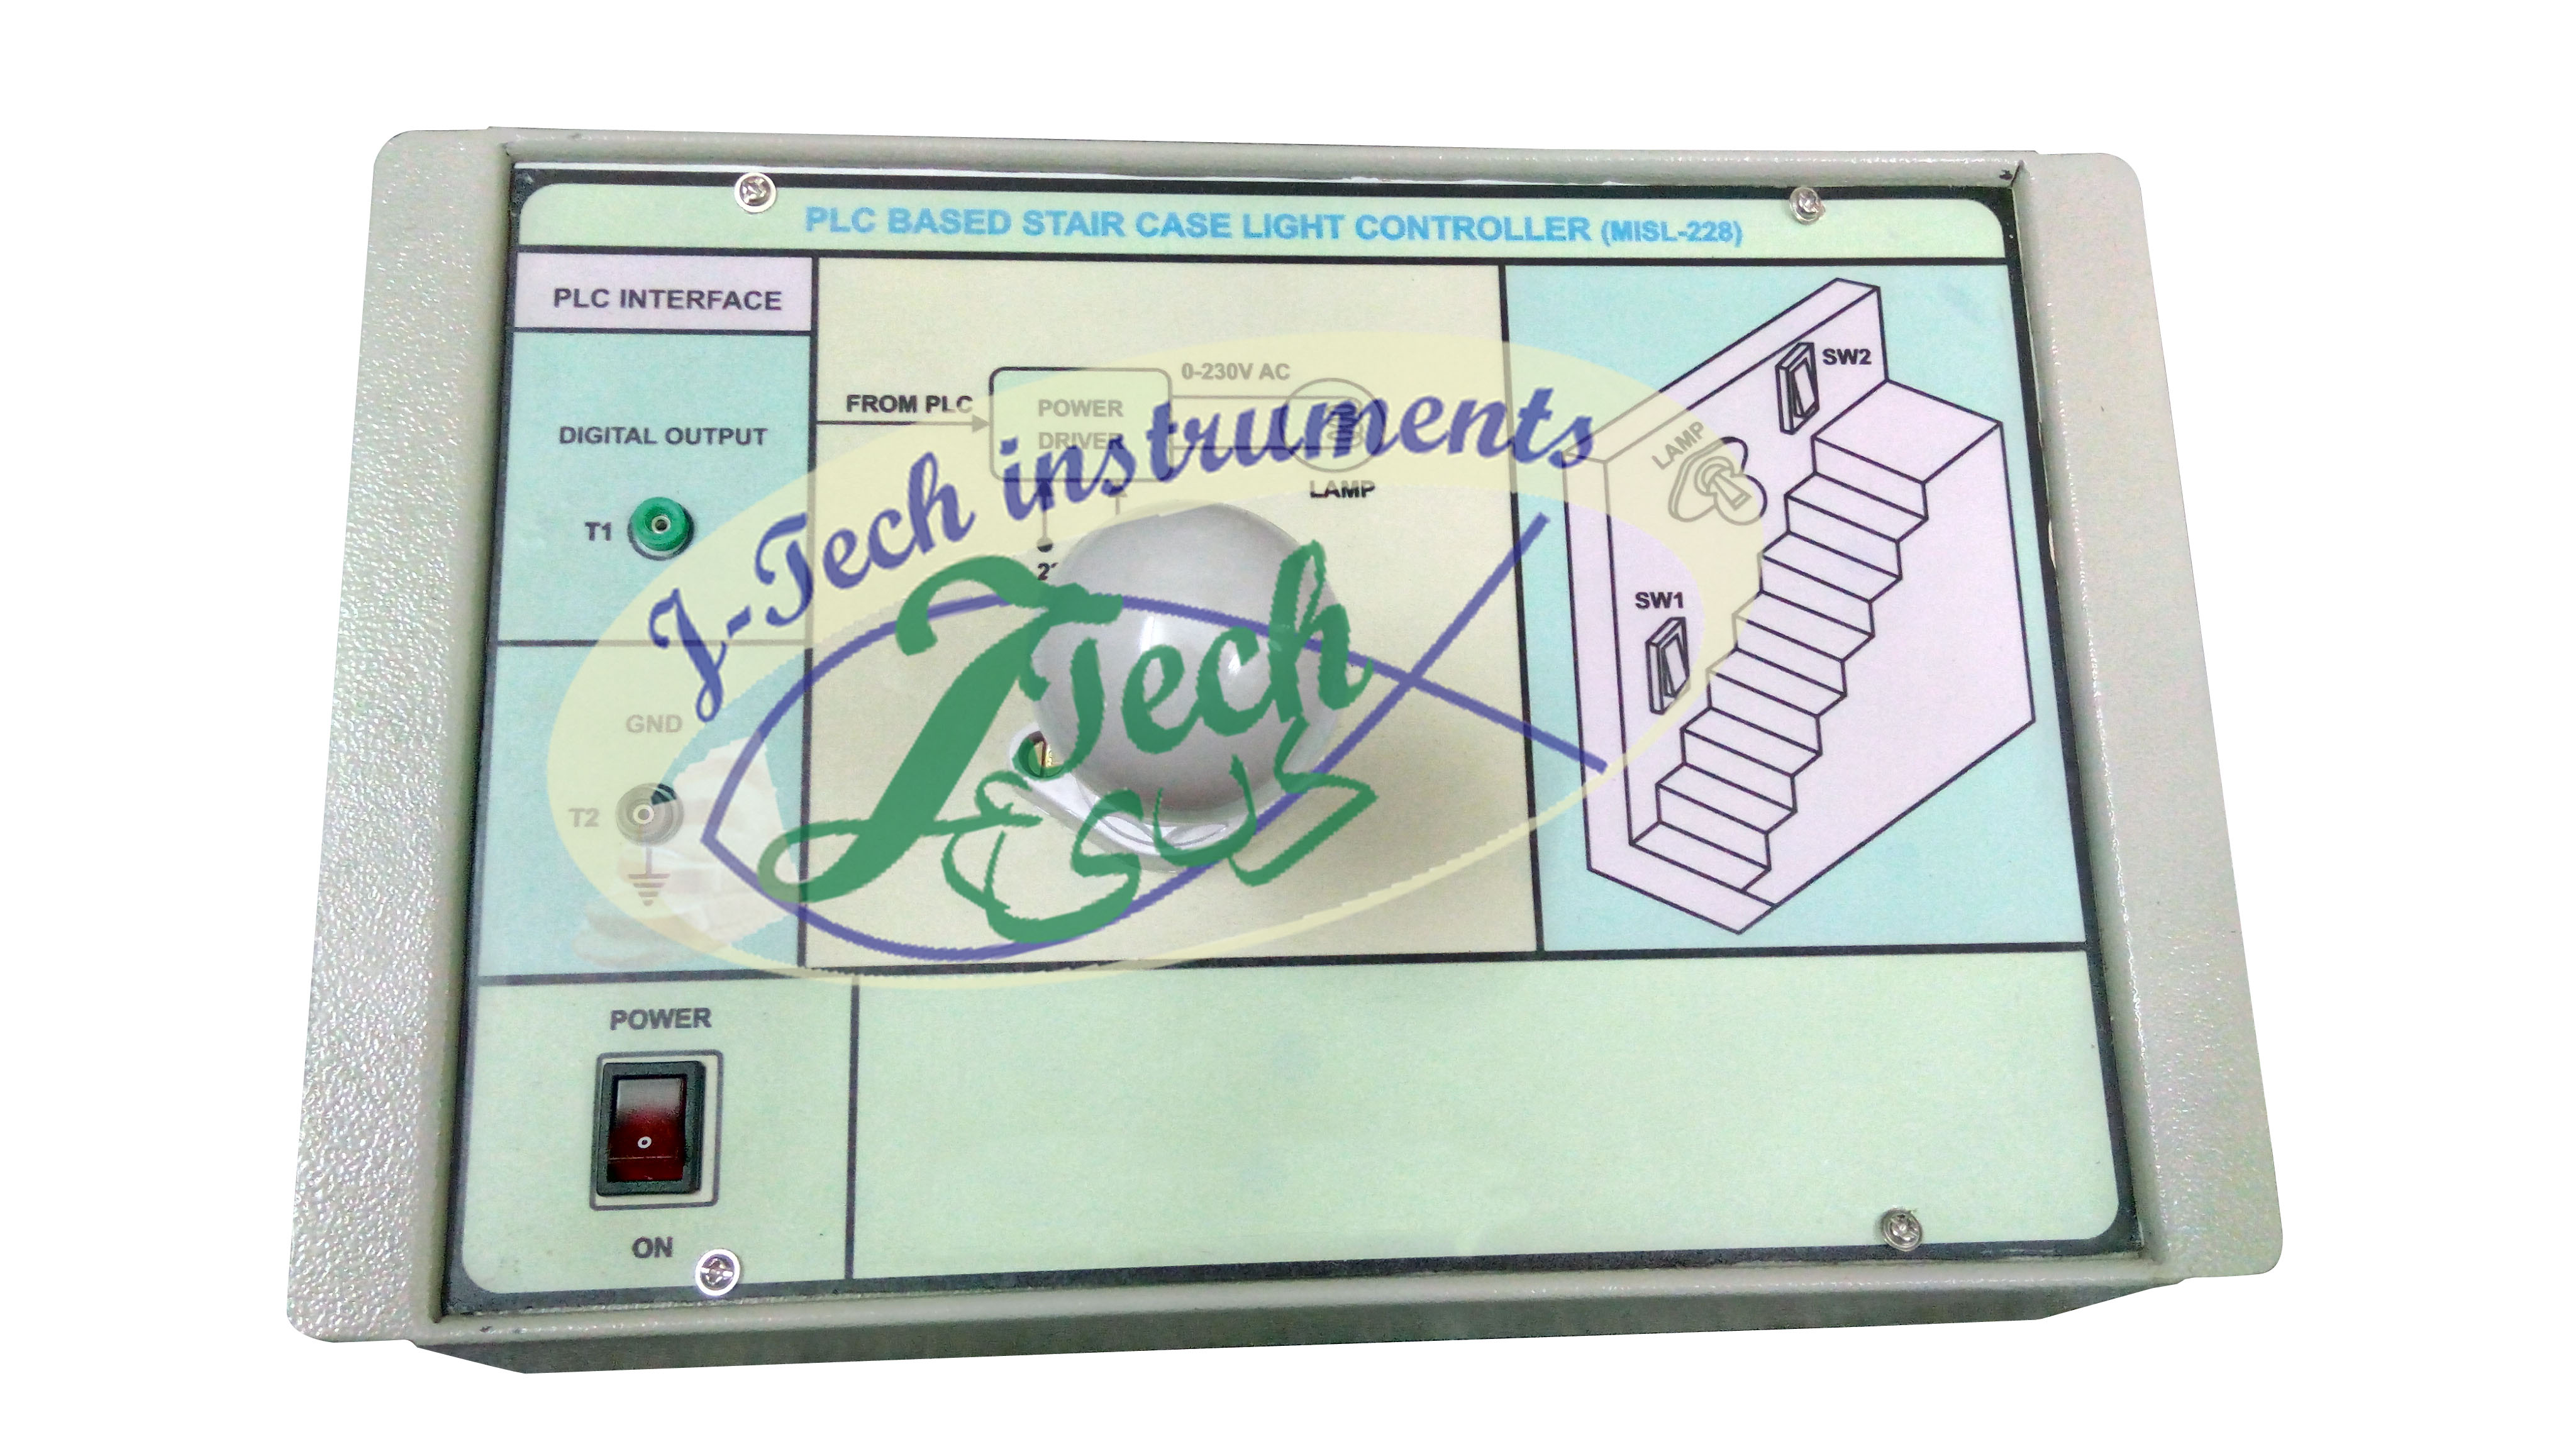 J-Tech Instruments - Products -